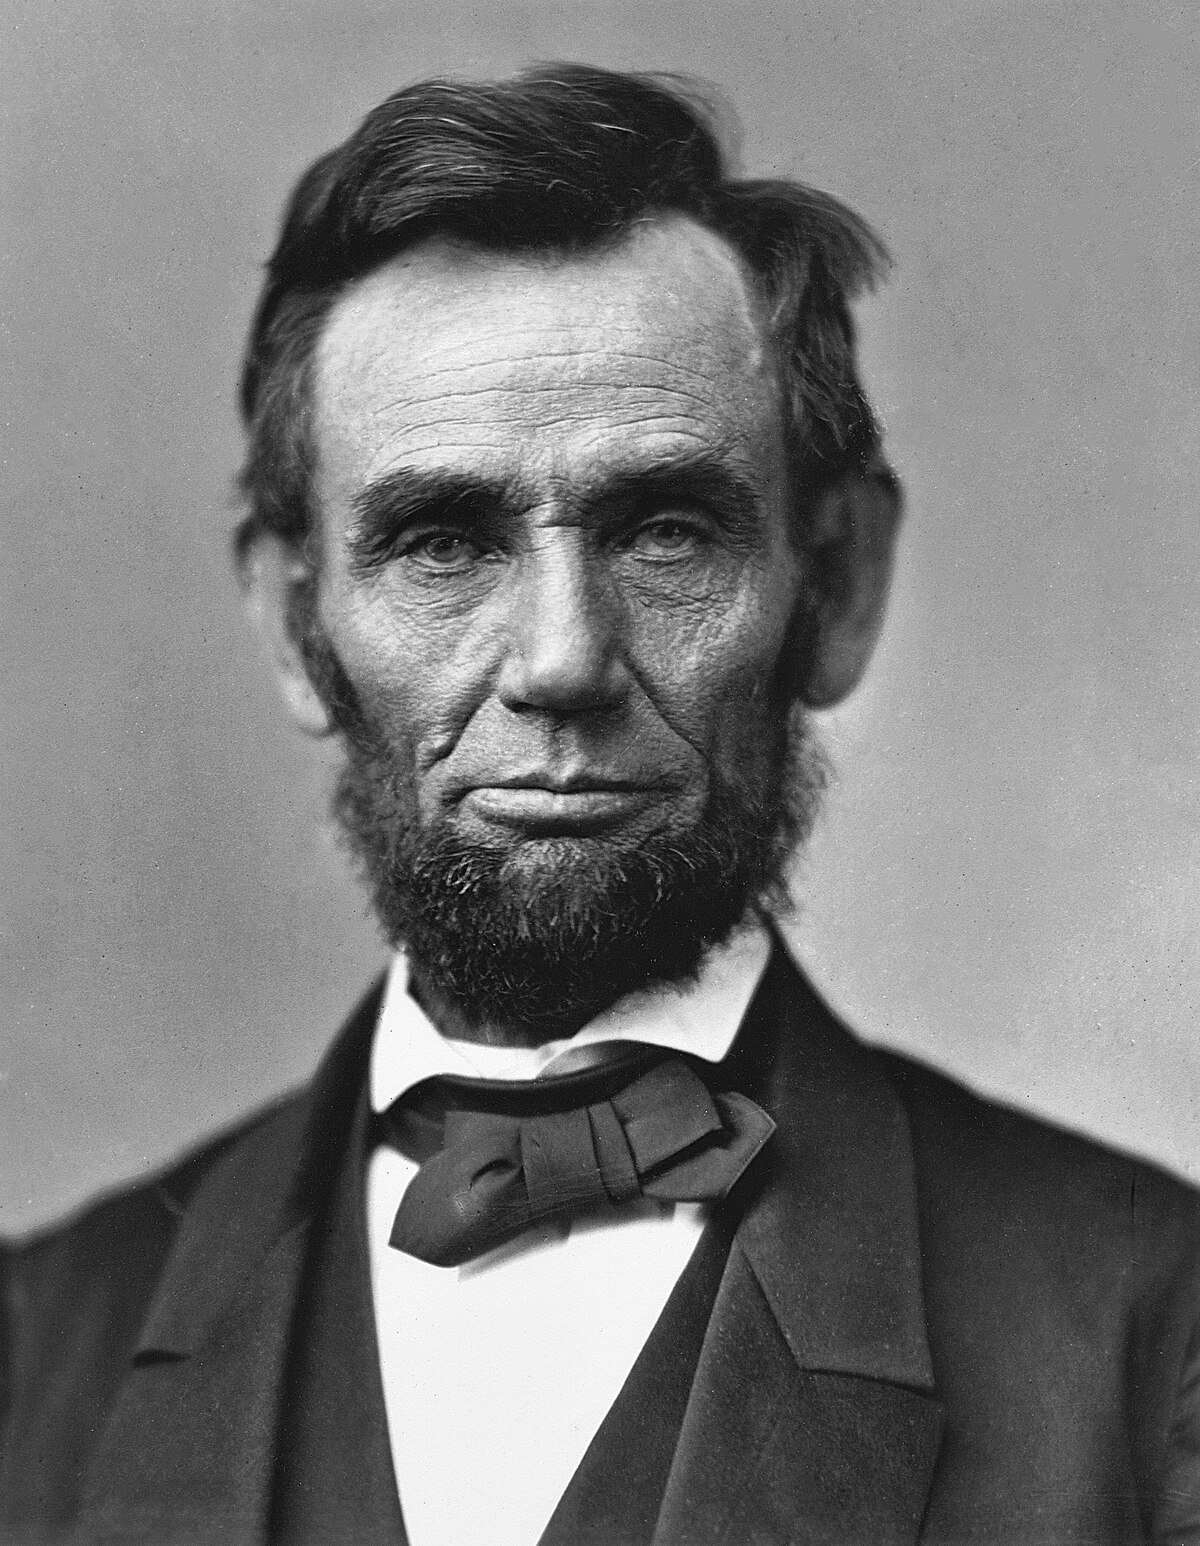 An iconic photograph of a bearded Abraham Lincoln showing his head and shoulders.